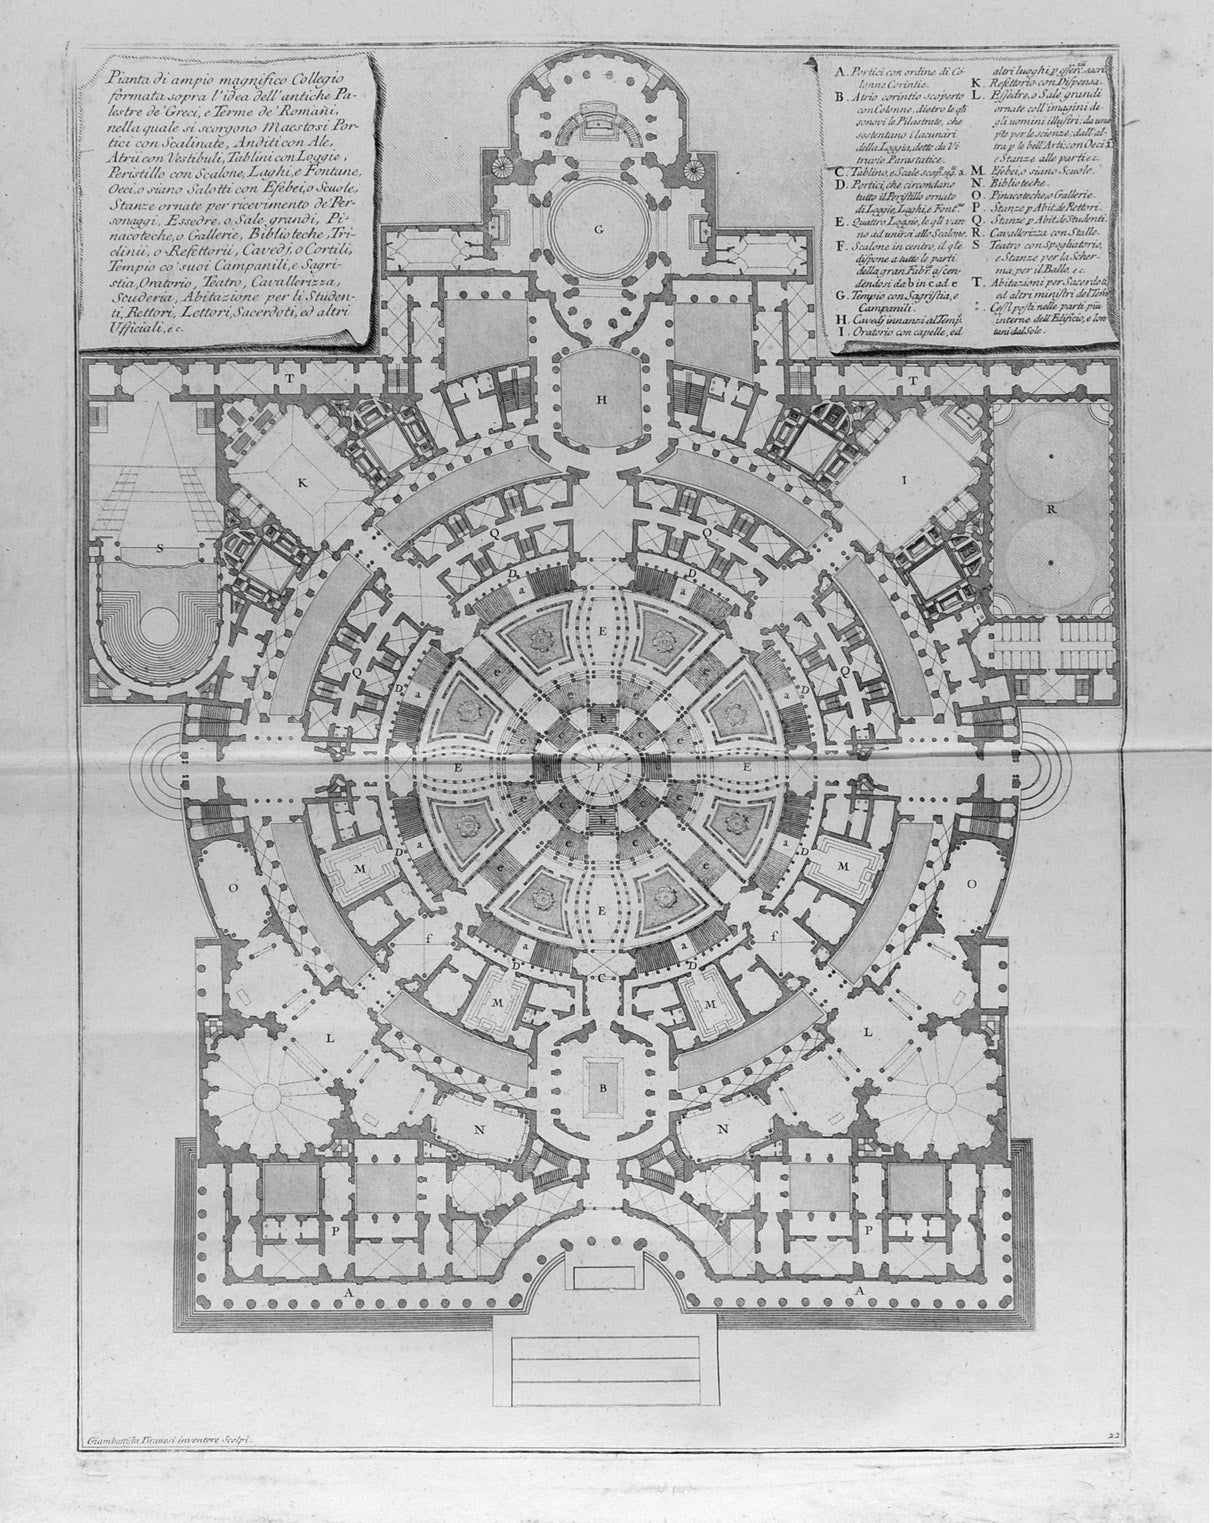 Plan of a spacious and magnificent college designed after the gymnasia of the Greeks and the baths of the Romans